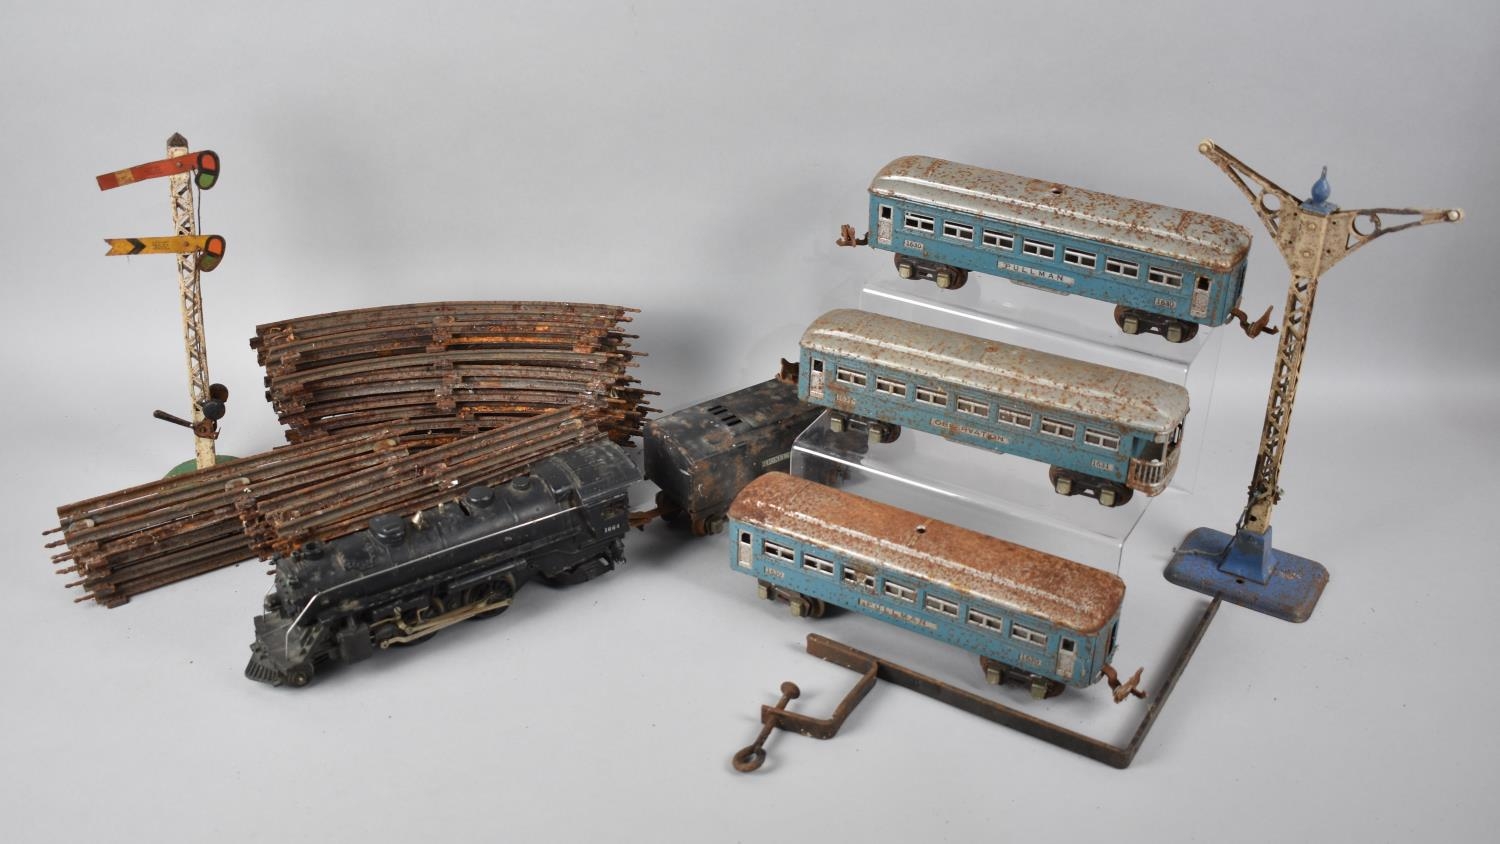 A Lionel Tinplate O-Gauge Model Railway Set comprising Loco, Tender, Pullman Coaches and Track